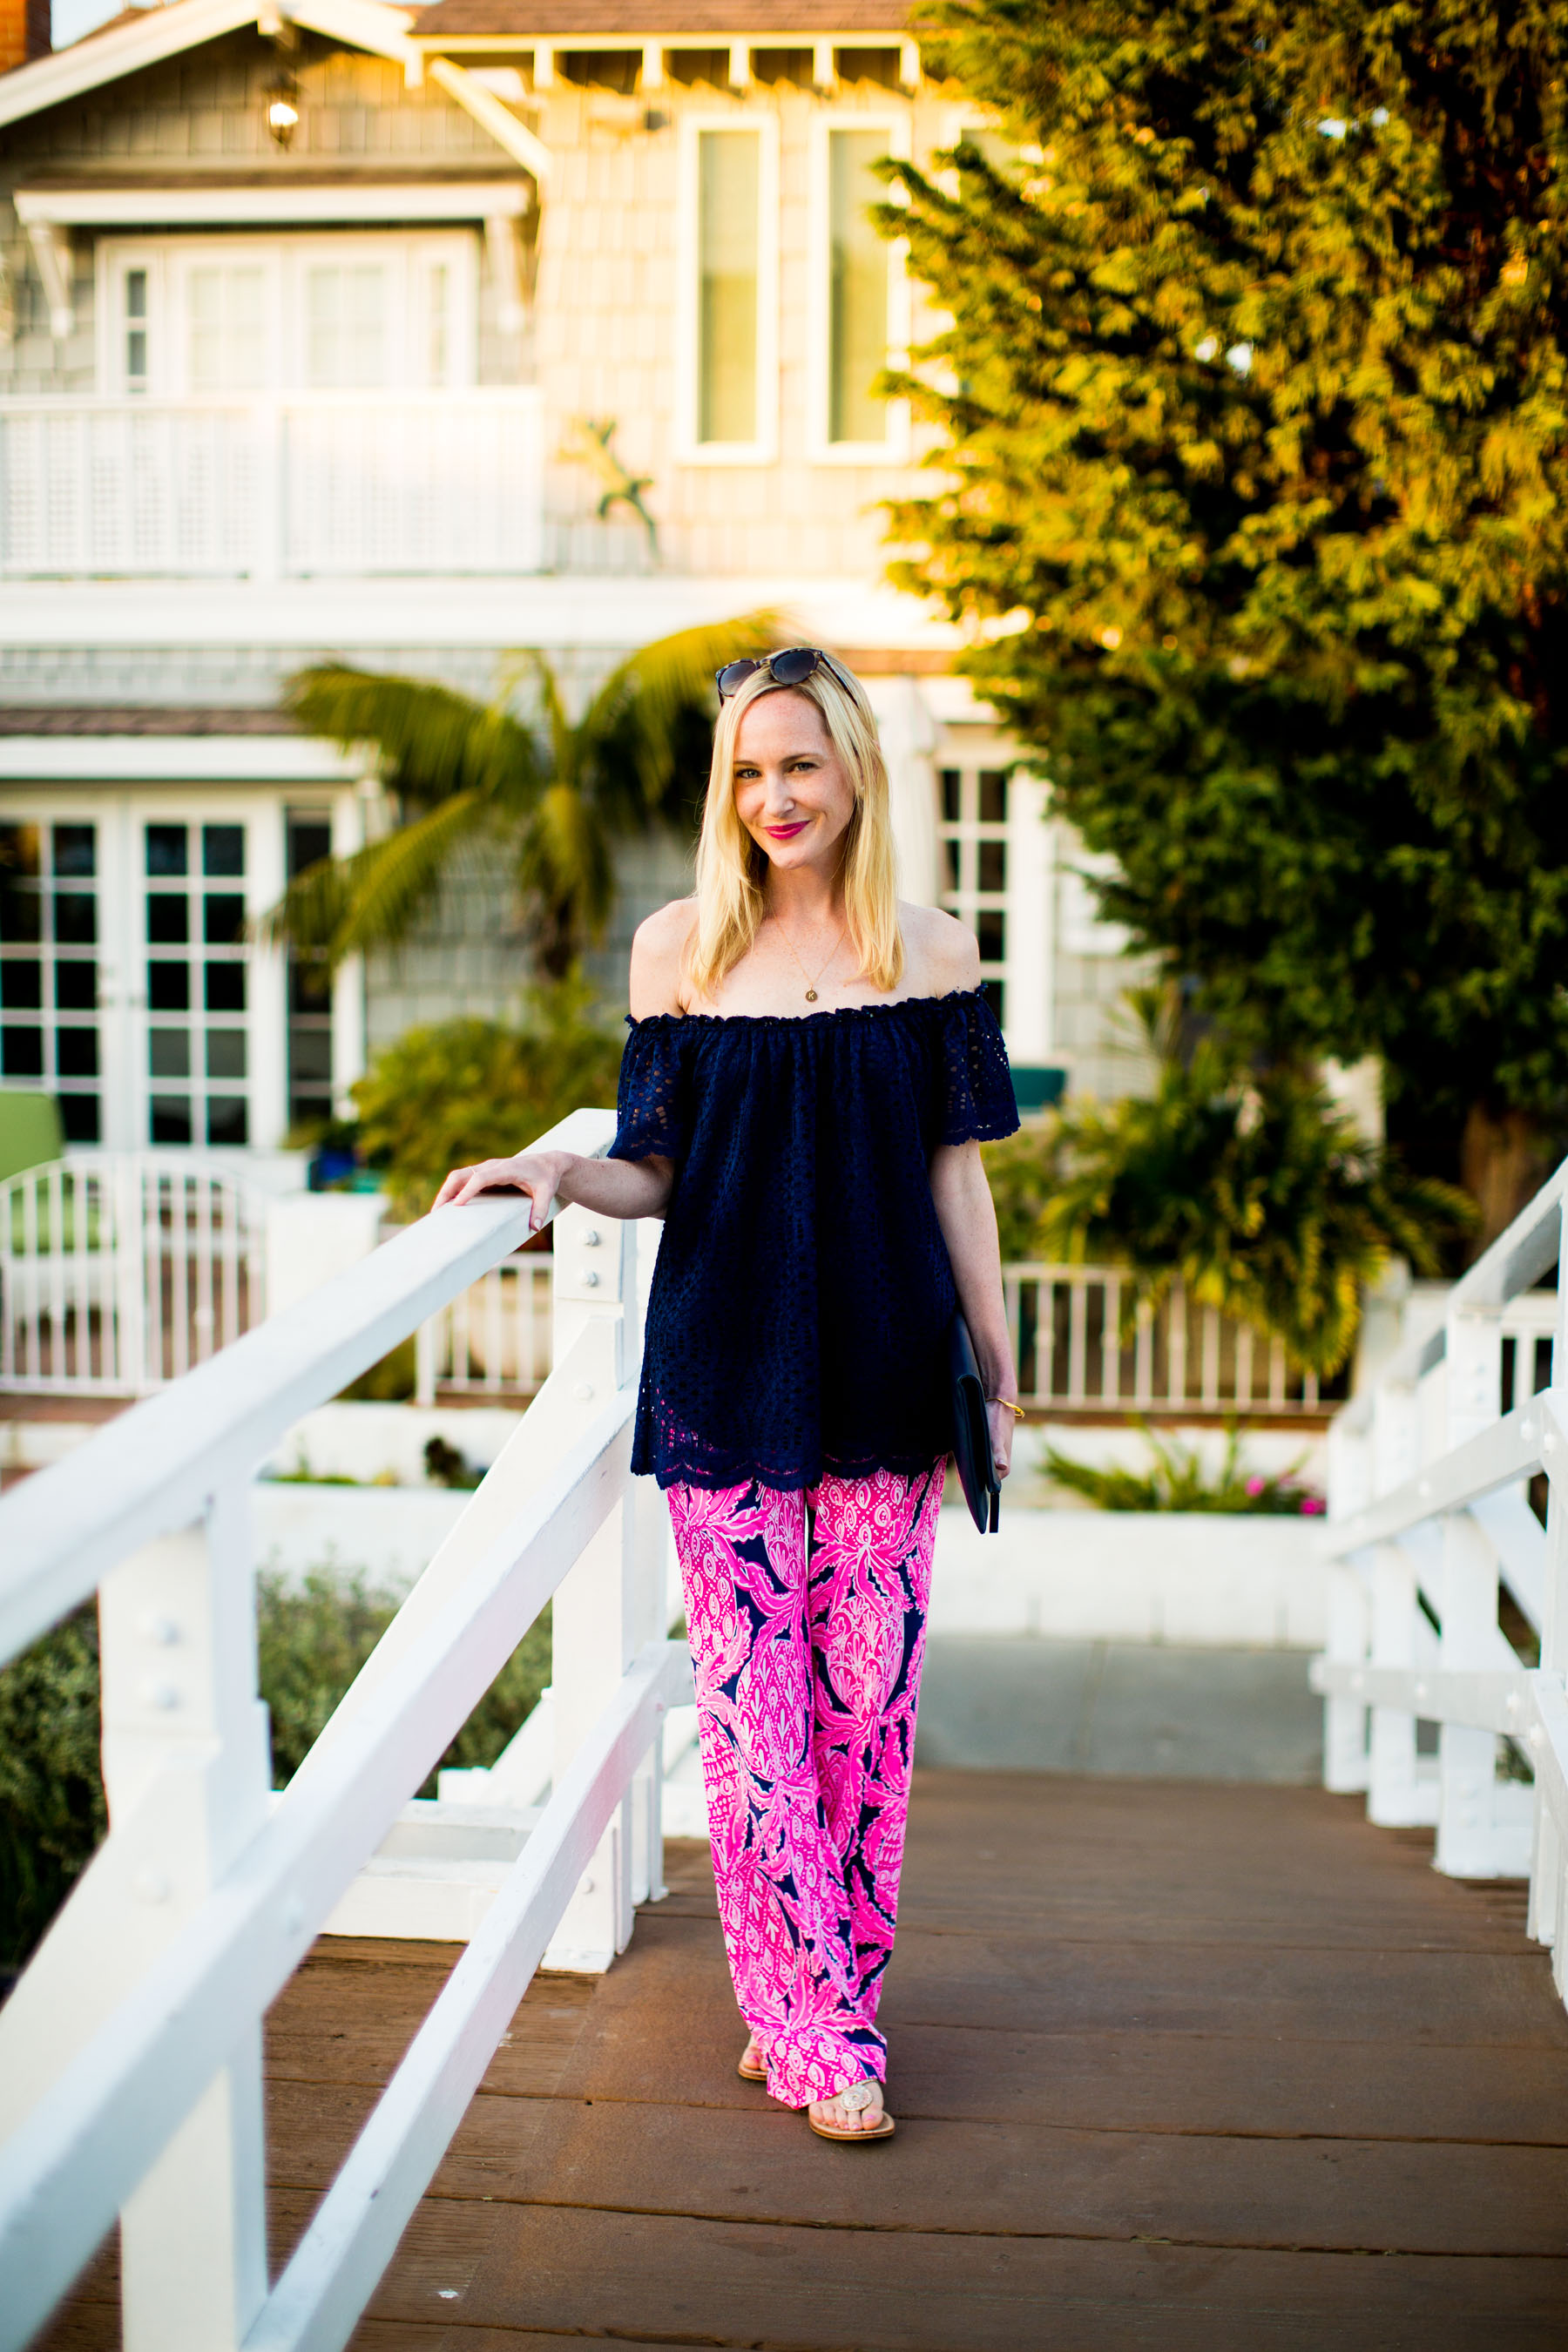 Lilly Pulitzer Pants and Off-the-Shoulder Top / Jack Rogers Flip Flop / Everlane Clutch 